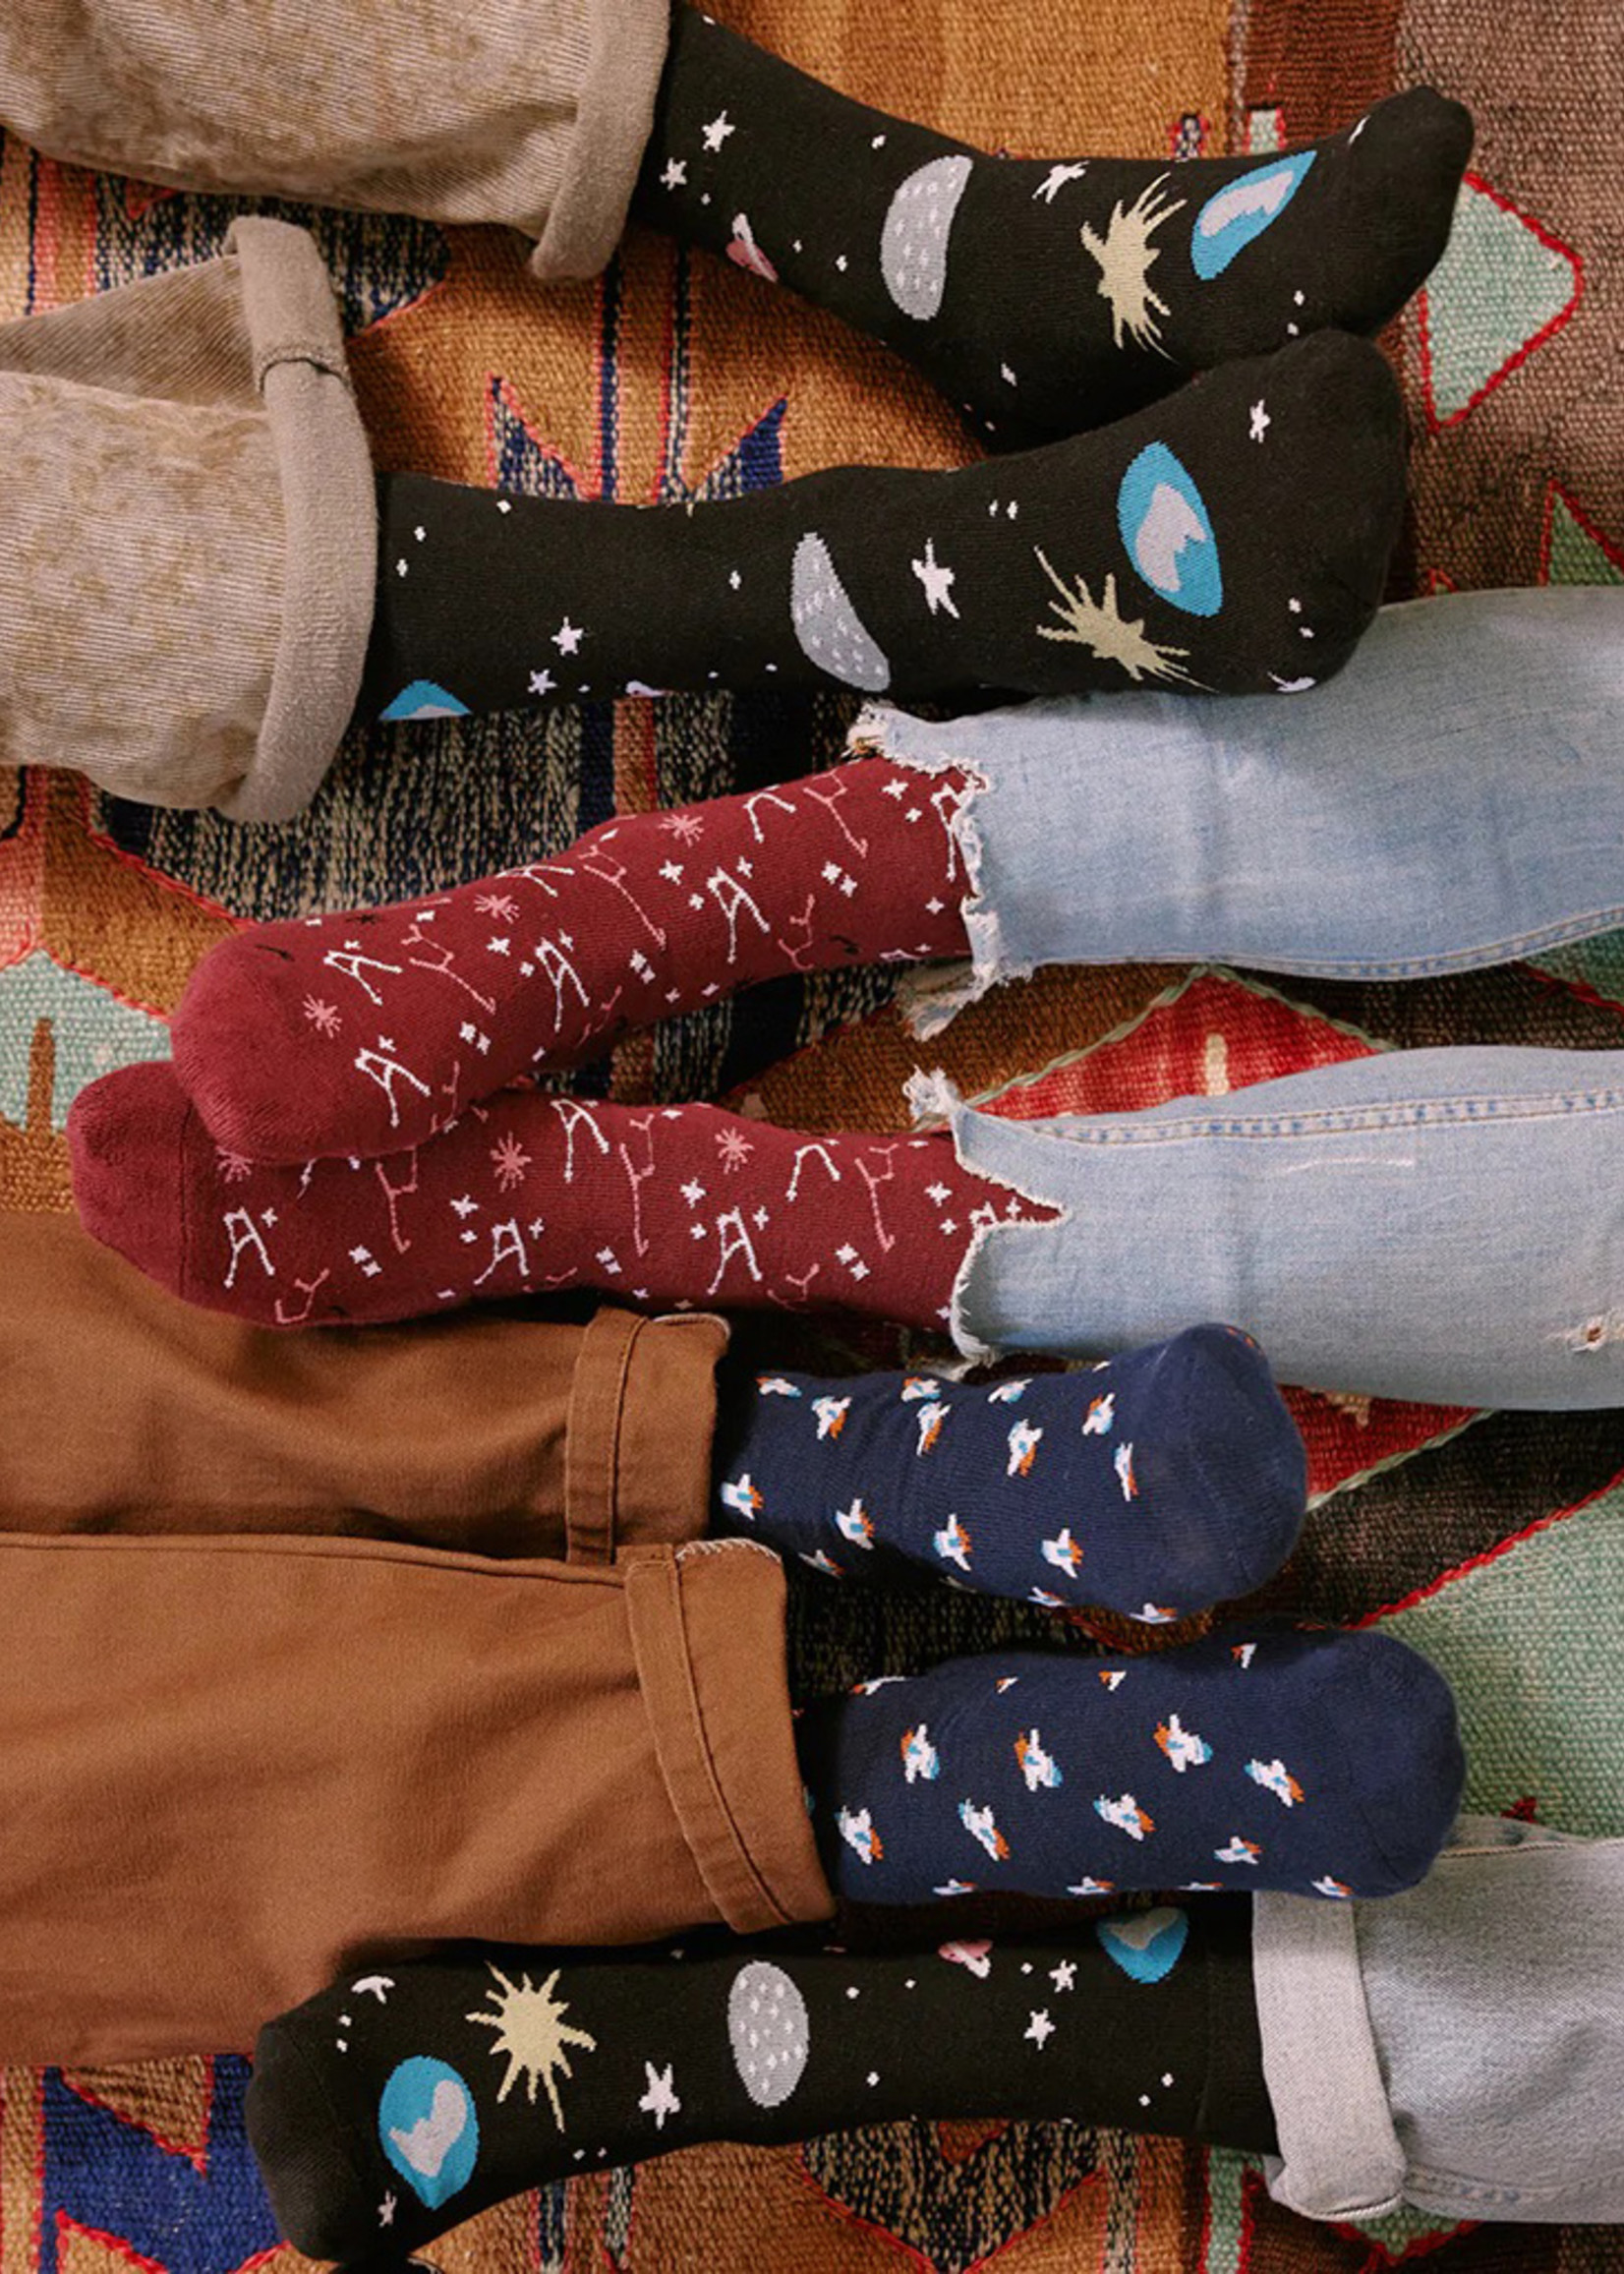 Conscious Step Women's Rocket Ship Socks that Support Space Explore